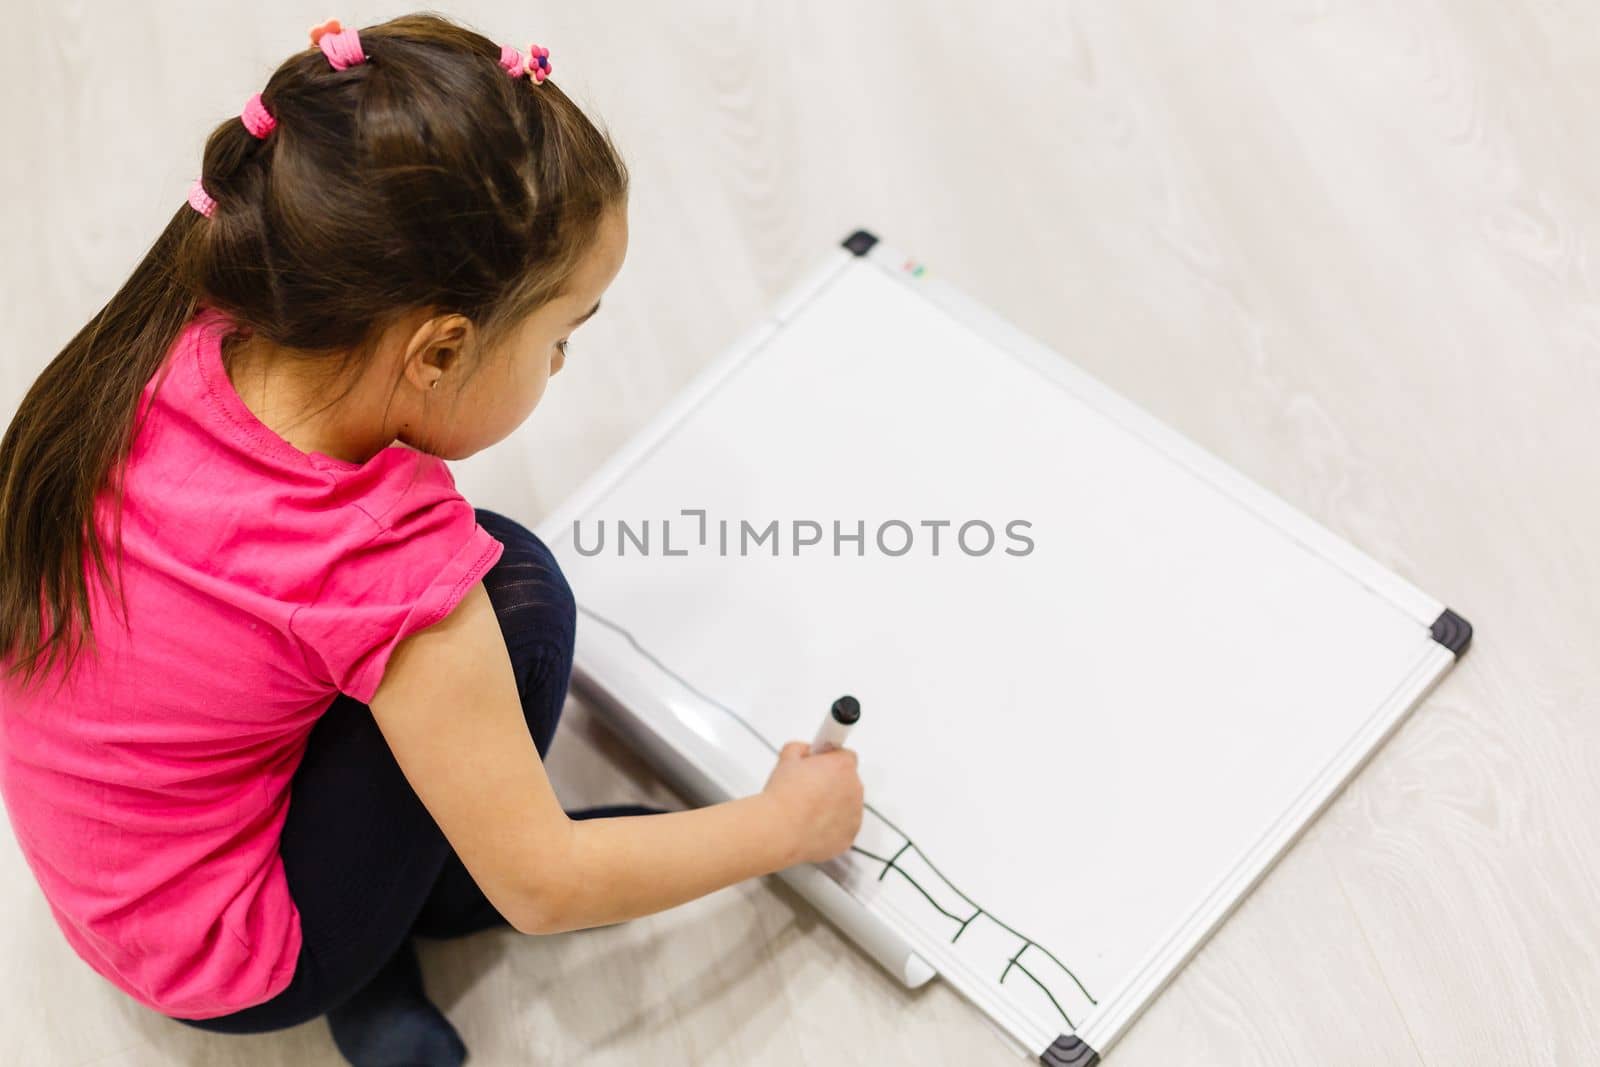 little girl writing on the white board, schooling background by Andelov13